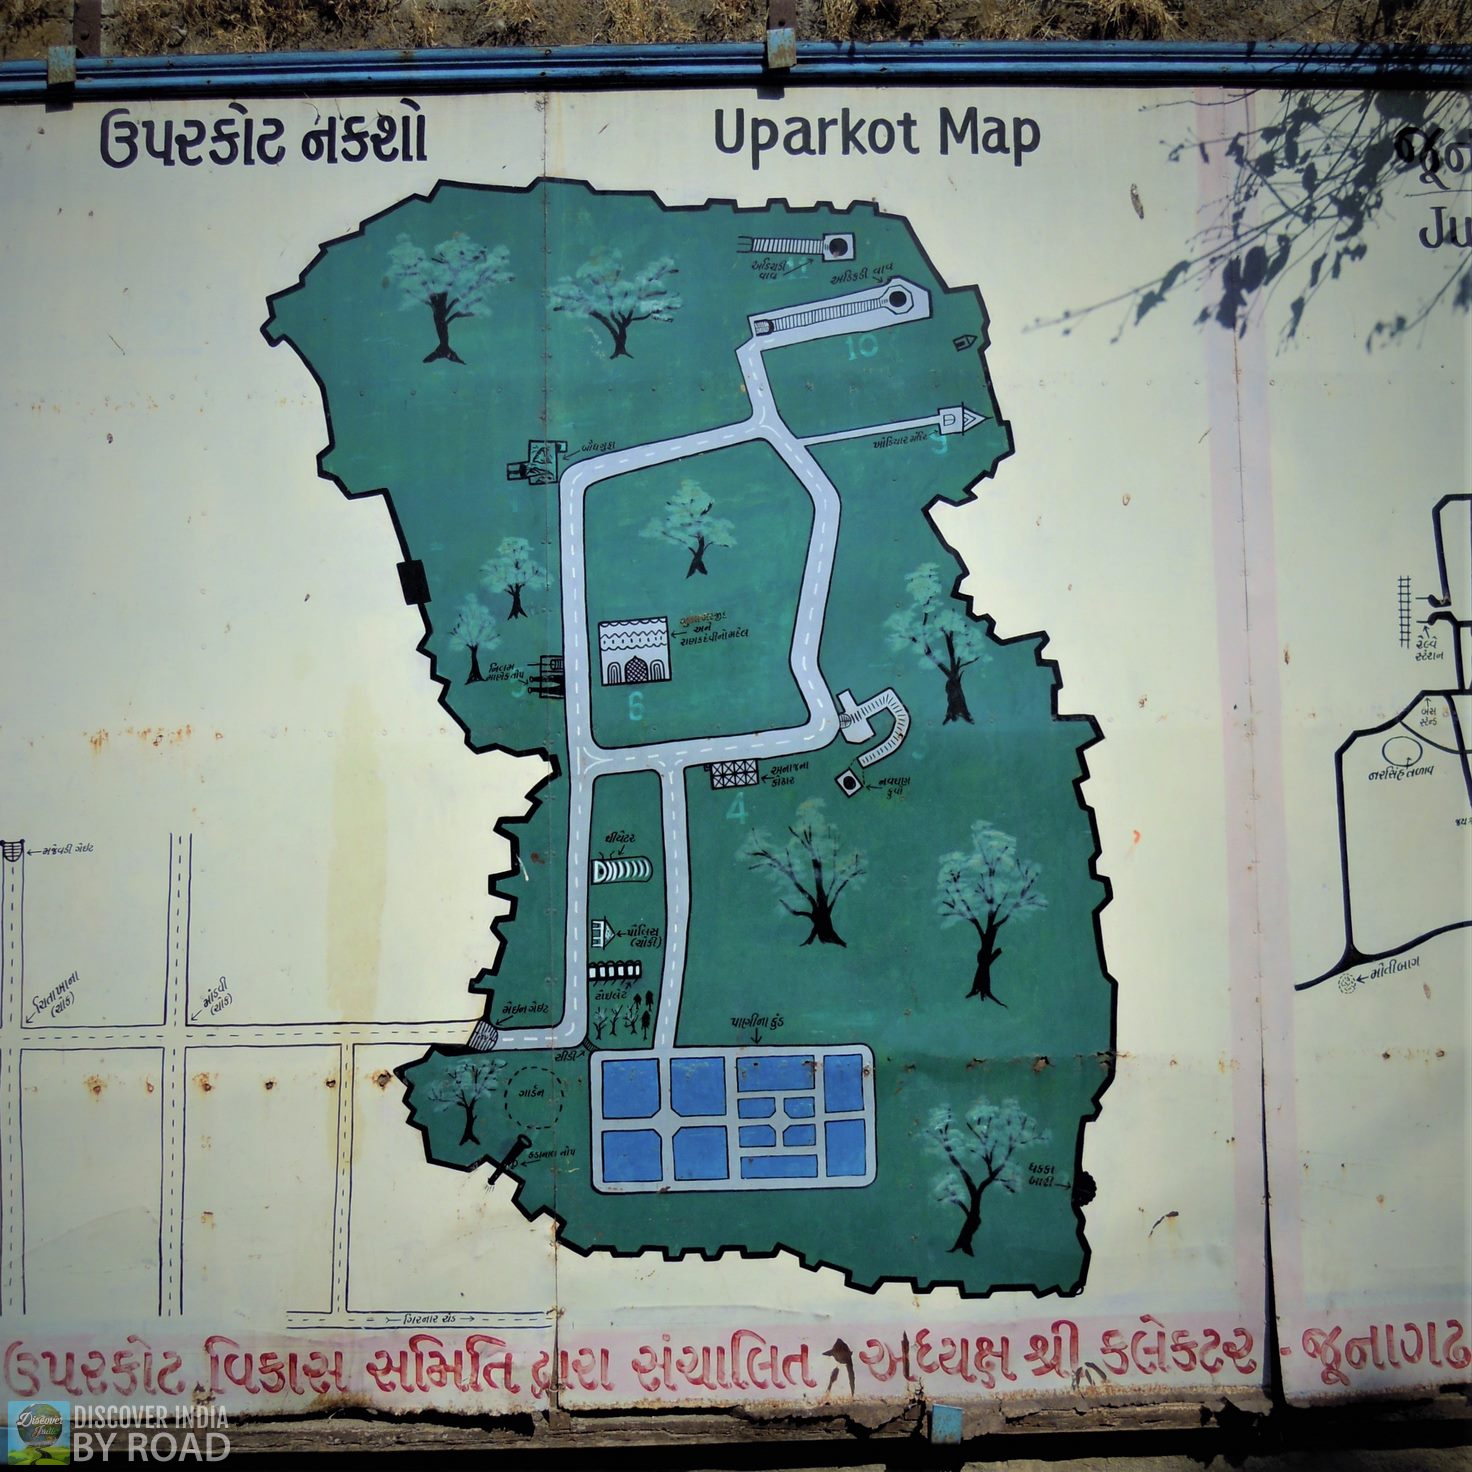 Uperkot fort Map for tourists